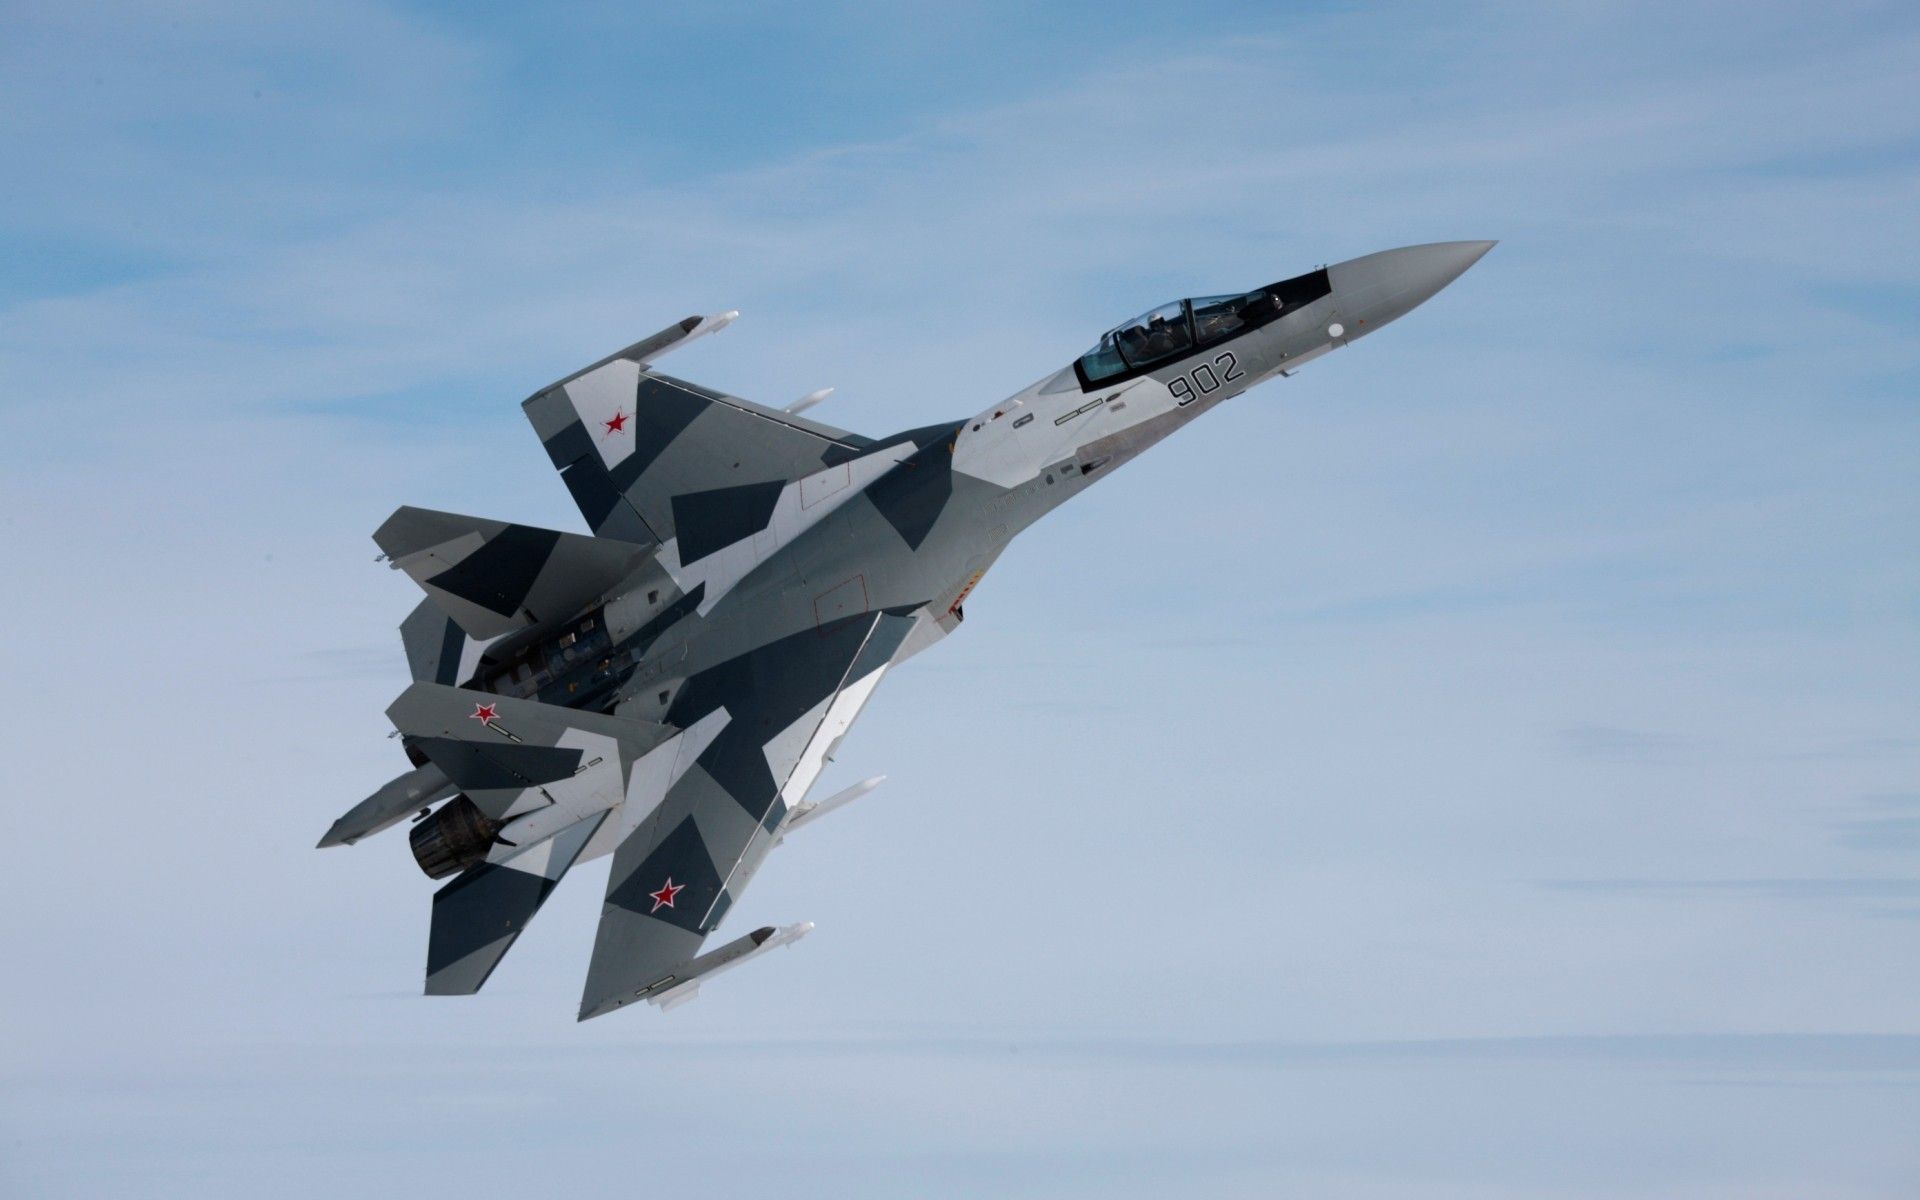 Sukhoi Su Aircraft, Military Aircraft, Military Wallpaper HD / Desktop and Mobile Background